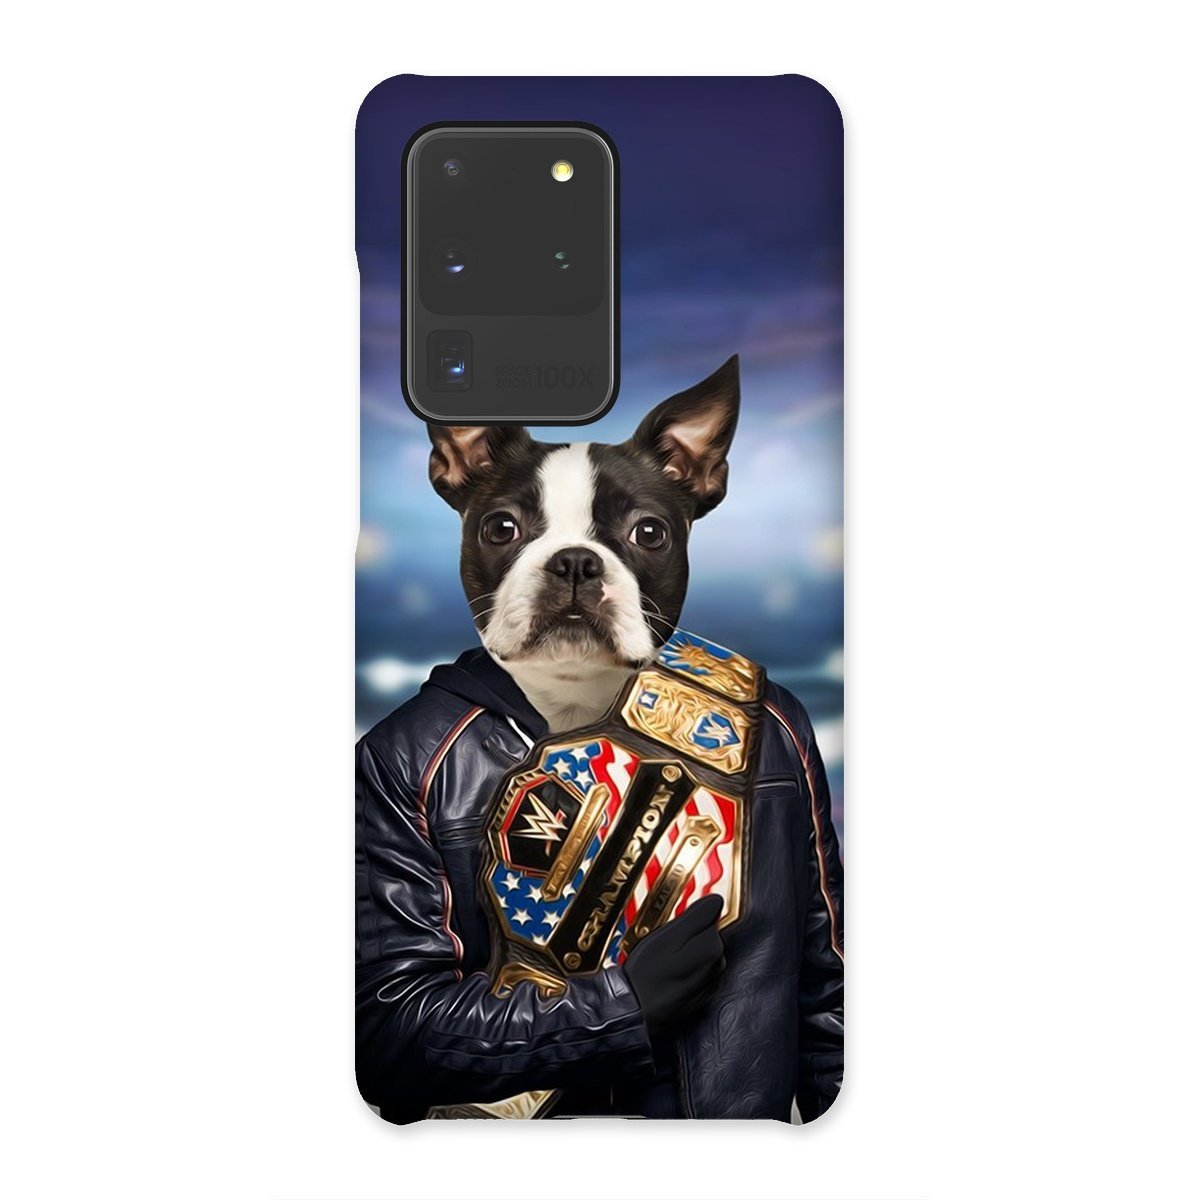 The Wrestler: Custom Pet Phone Case - Paw & Glory - pawandglory, pet portrait phone case, personalised puppy phone case, personalised pet phone case, life is better with a dog phone case, personalized iphone 11 case dogs, life is better with a dog phone case, Pet Portrait phone case,